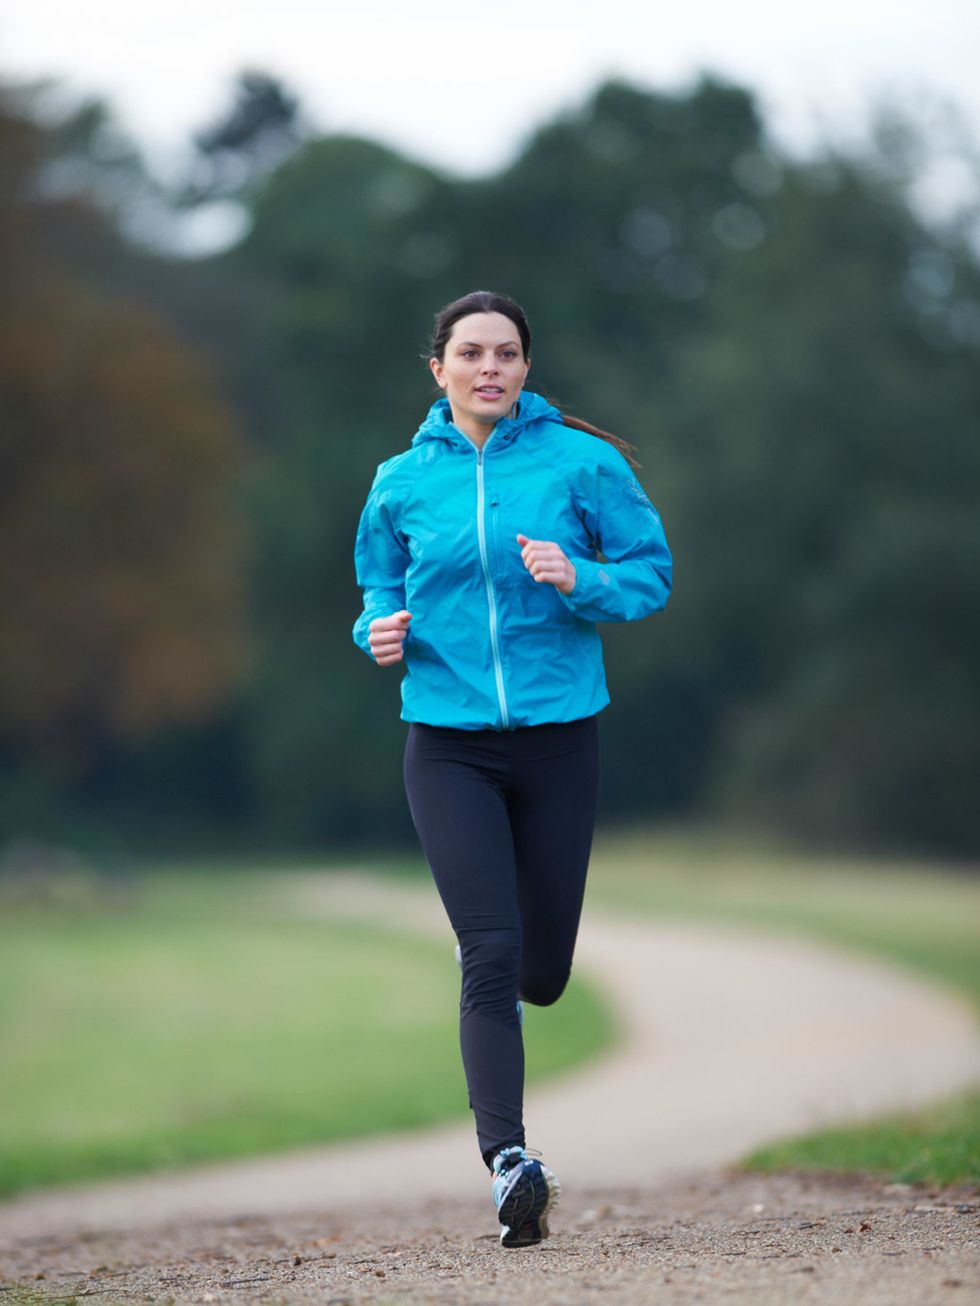 <p><strong>What:</strong> If a marathon sounds too much like hard work then head to <a href="http://www.parkrun.org.uk/home">parkrun.org.uk</a>. They organise weekly 5km timed runs that are free.</p><p>Simply browse the events listings around the country,